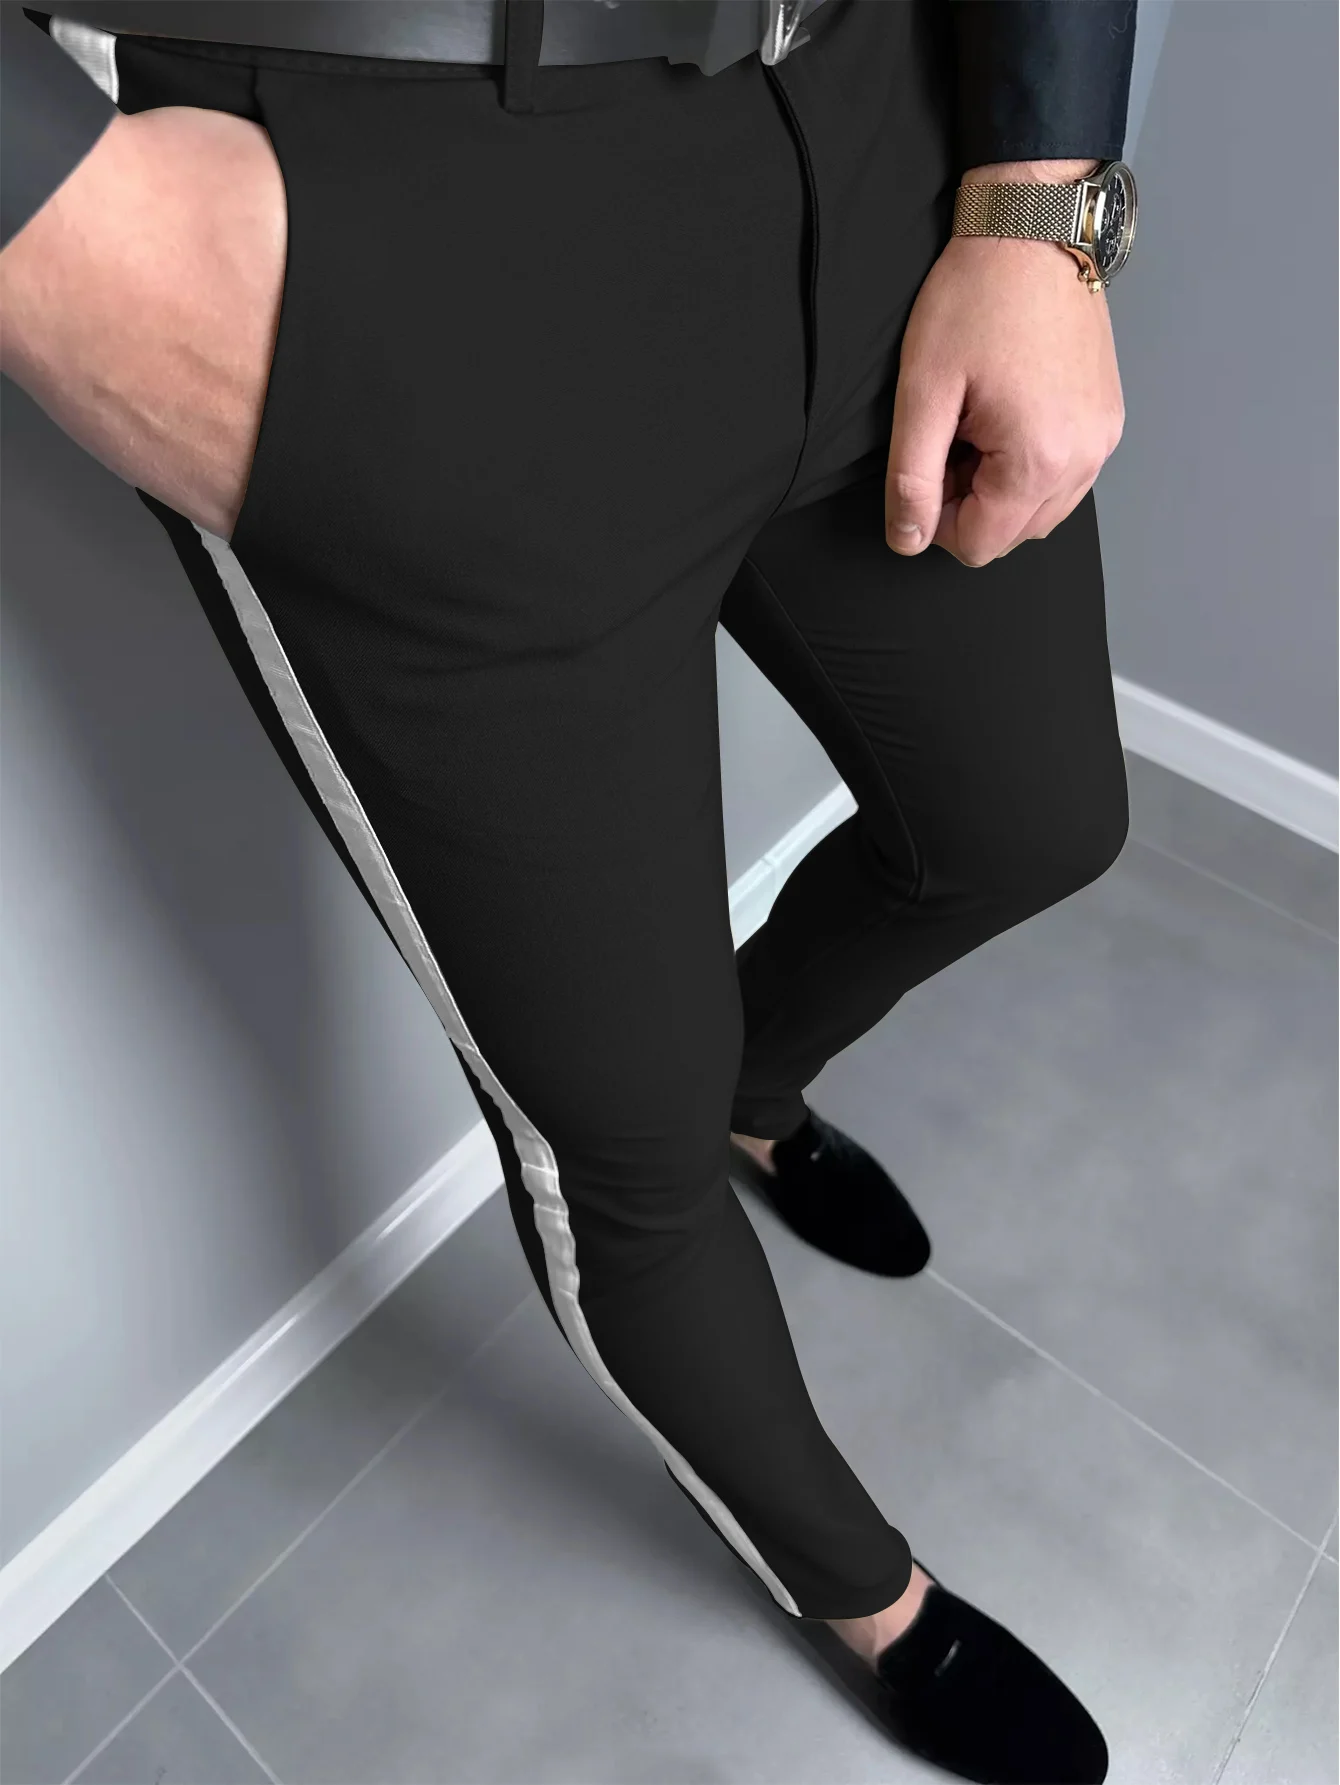 Fashion Light Business Men's Trousers Solid Color Splicing White Side Stripe Slim Pants Daily Versatile Traveling